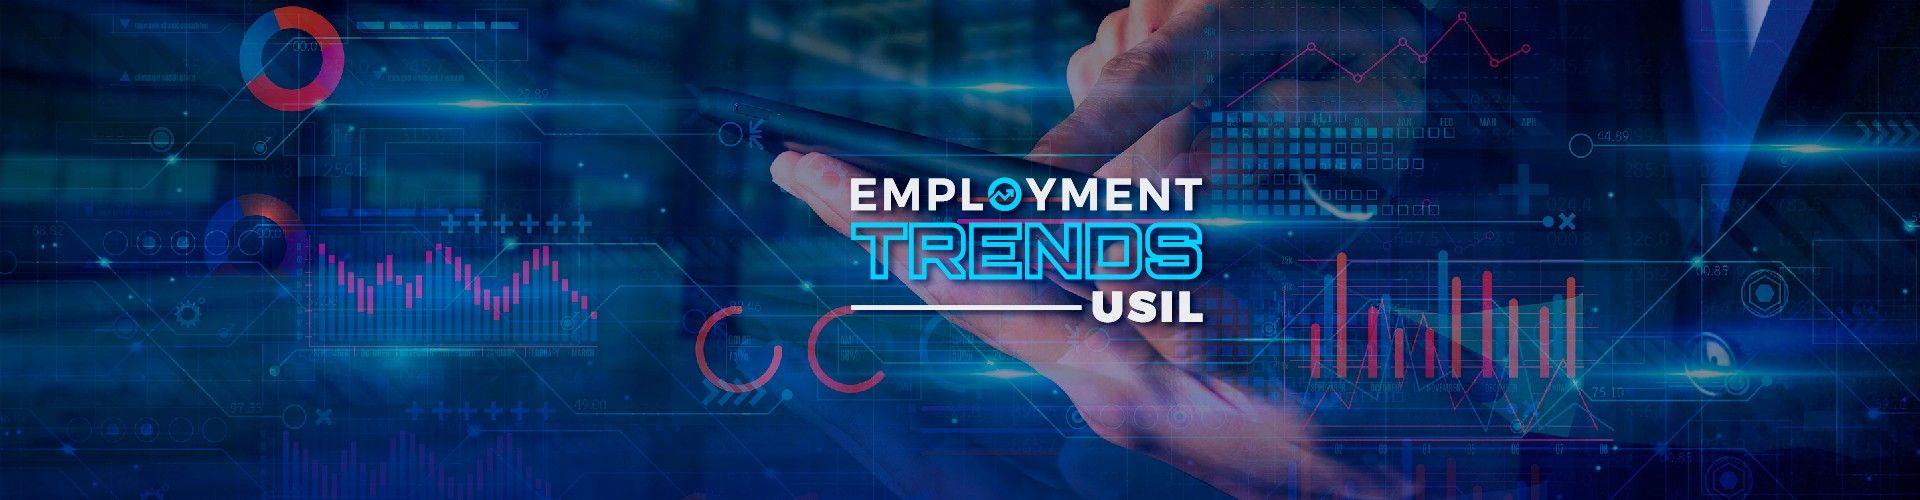 employment TRENDS USIL